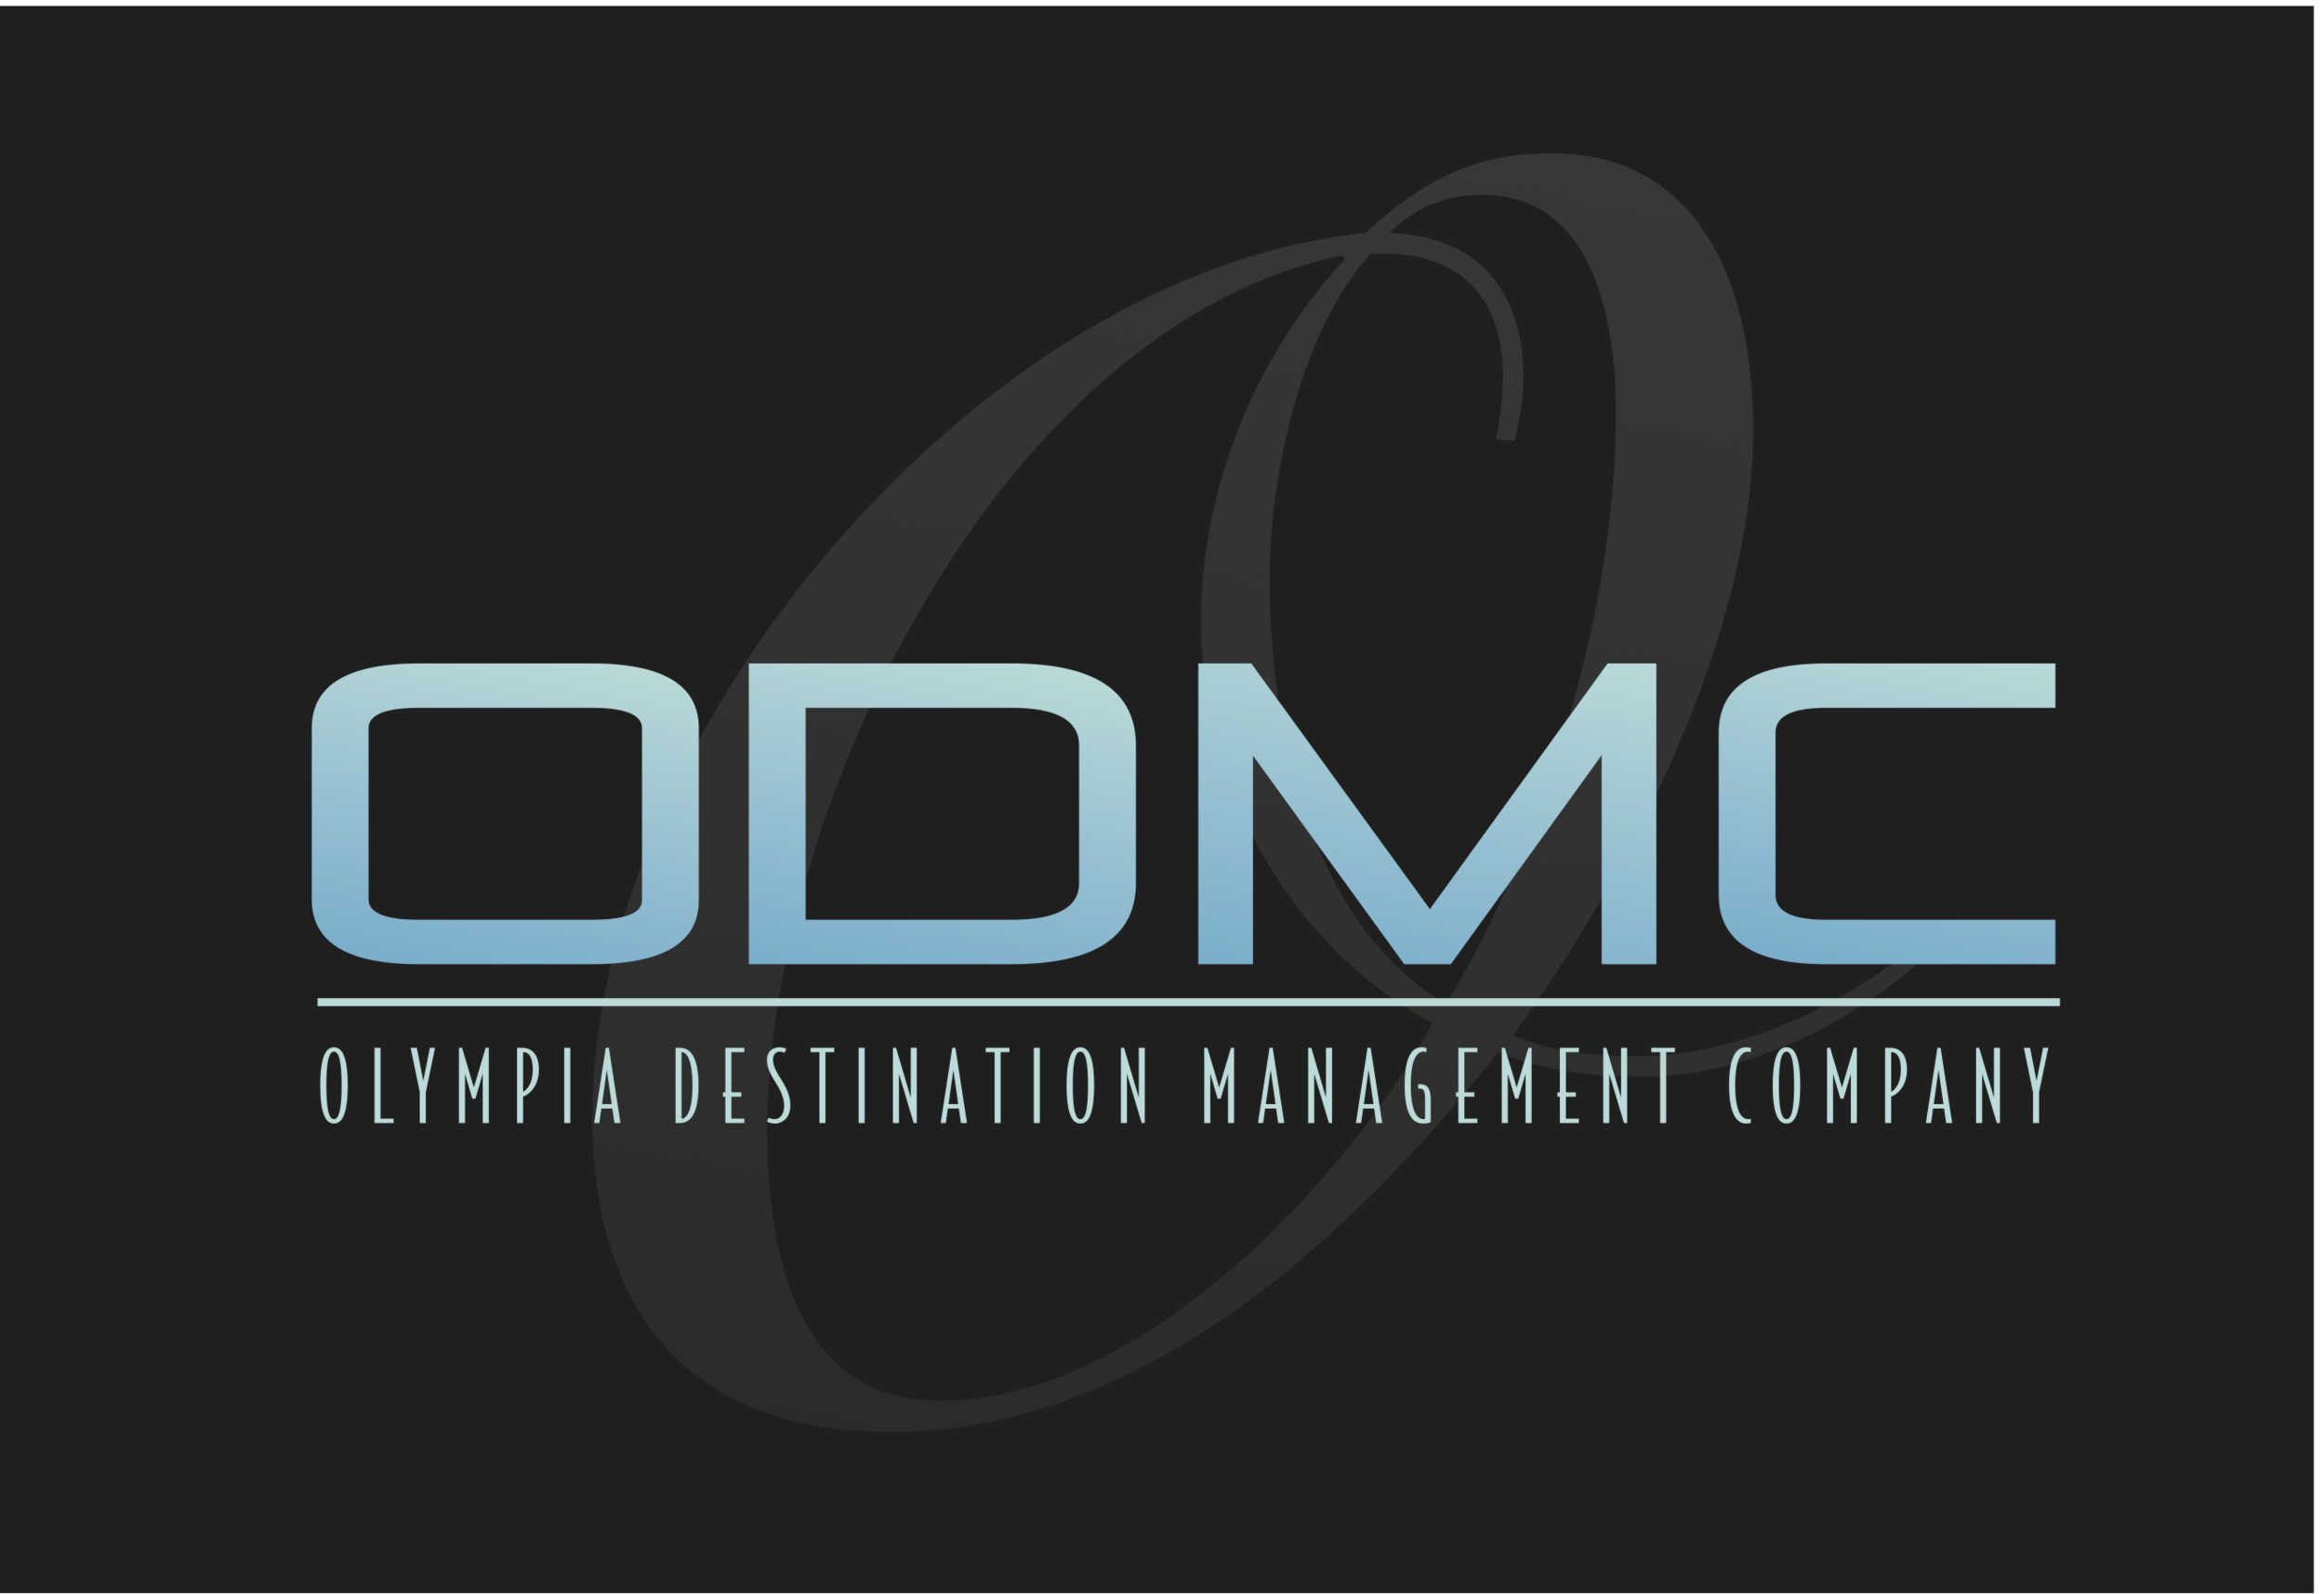 Olympia Destination Management Company.png